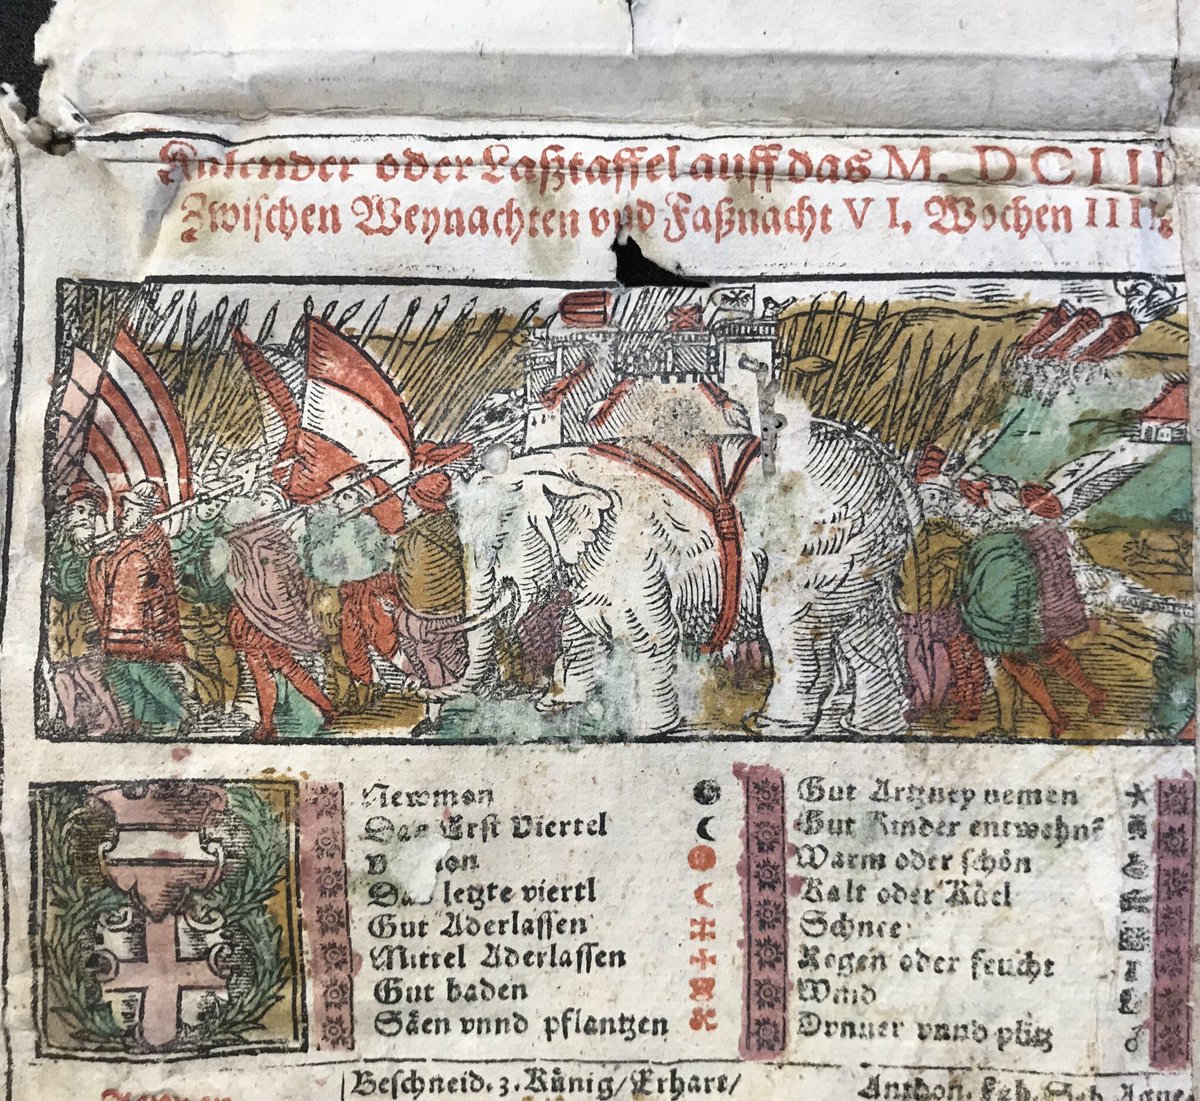 Nice new addition at #osurbml Pair of hand-colored German/Austrian broadside calendars for 1603 pasted as inner lining to a ca. 1400 MS Missal bifolium, together serving as a wrapper for an early-17th century ledger #mssfragments @OSULibrary @osu_cmrs